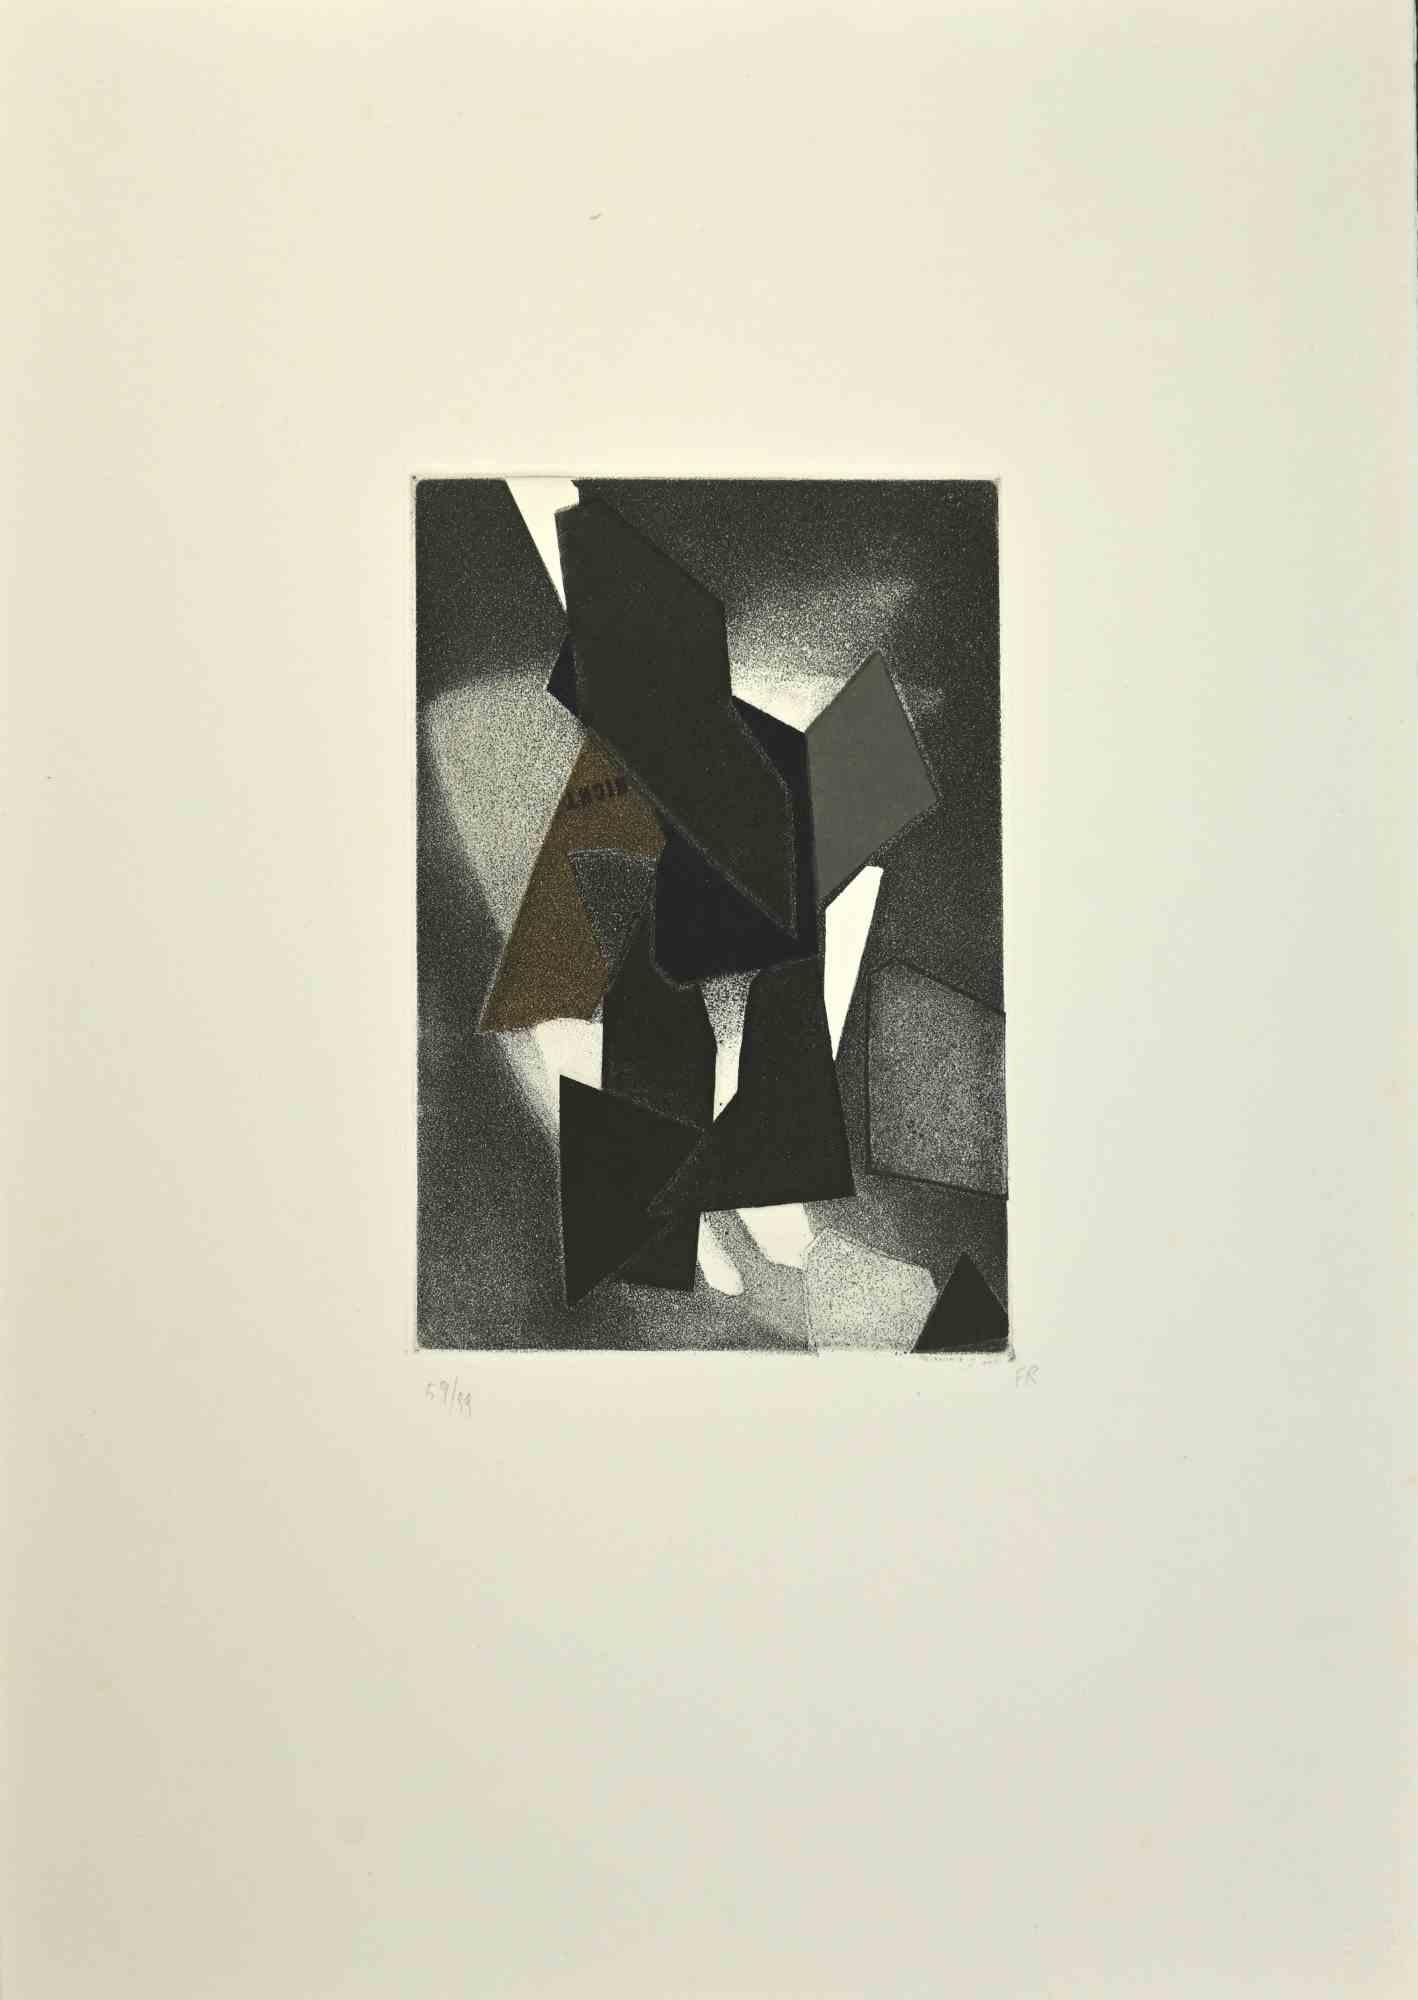 Untitled is an etching and collage on paper realized by Hans Richter in 1973. 

Published by La Nuova Foglio, a publishing house of Macerata.

Monogrammed by Frida Richter and numbered in pencil on the lower margin. Edition of 99 prints.

Good